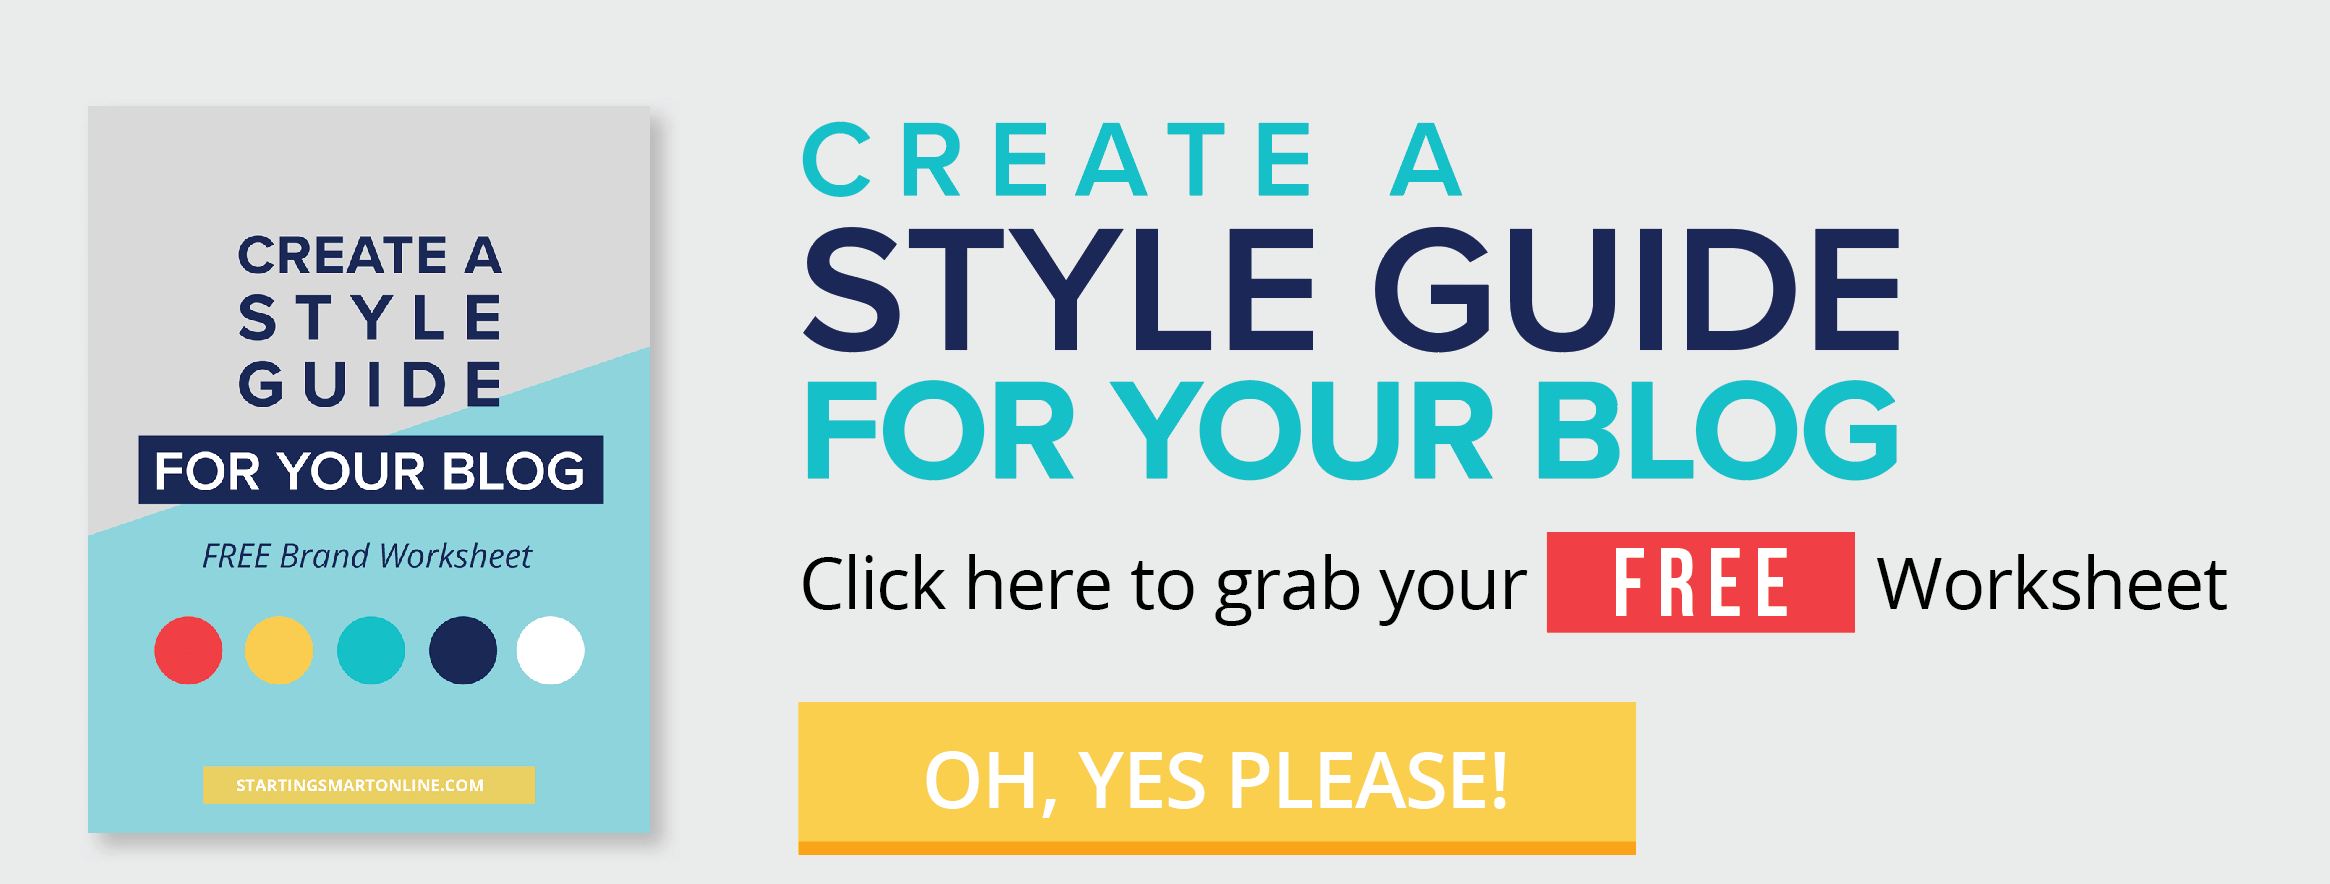 Create a Style Guide for Your Blog